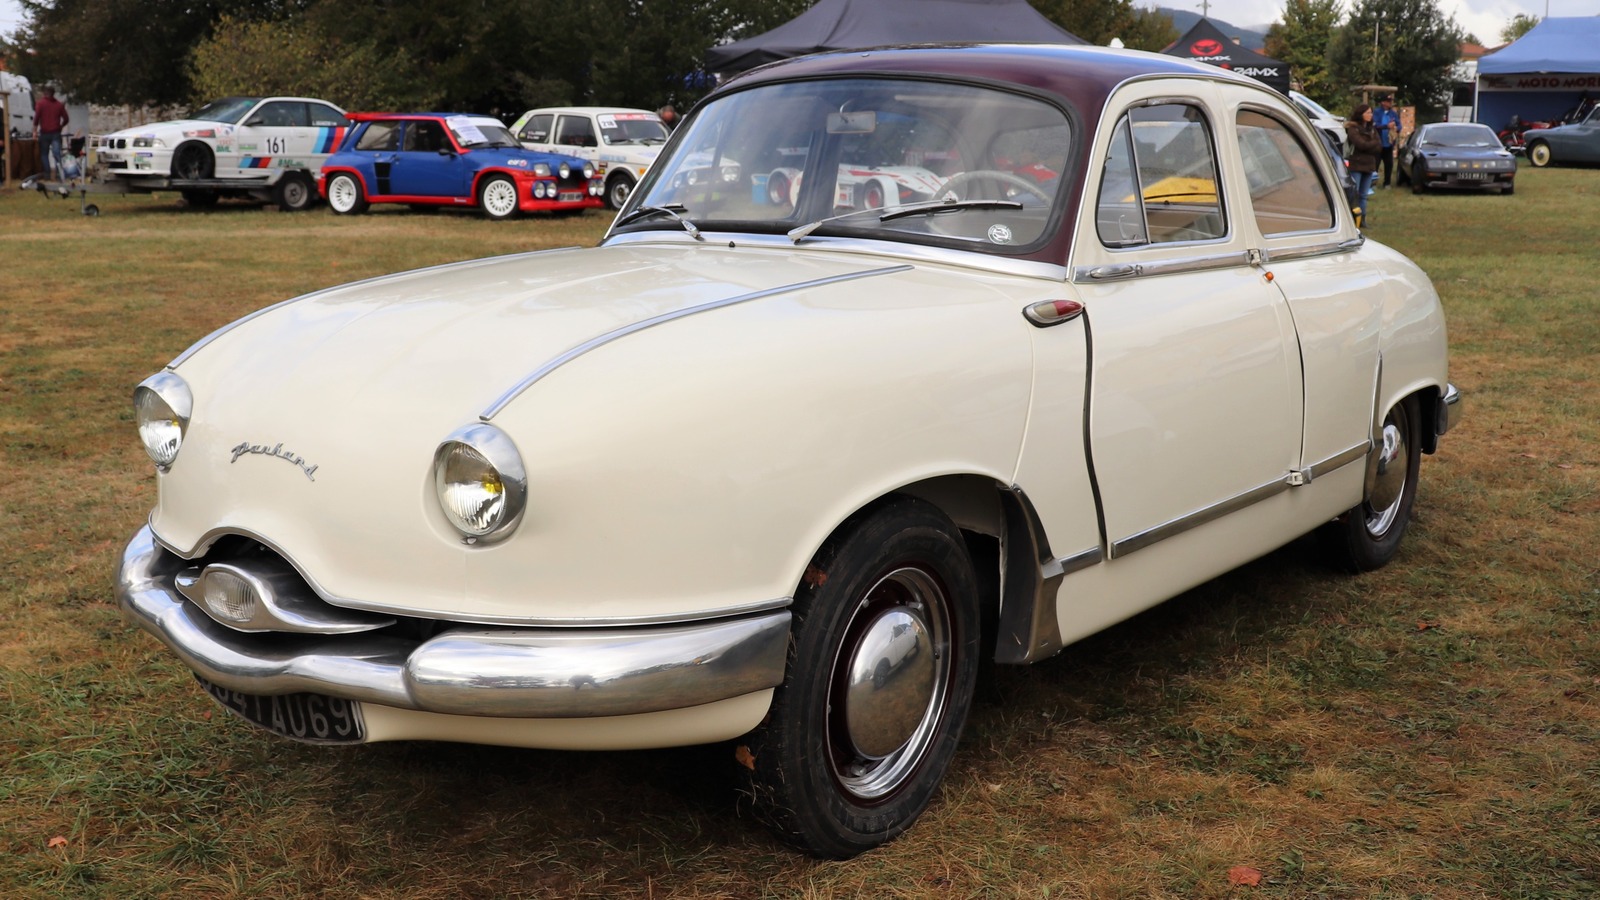 This Peculiar Panhard Dyna Z Was The Result Of Rigorous Wind Tunnel Testing